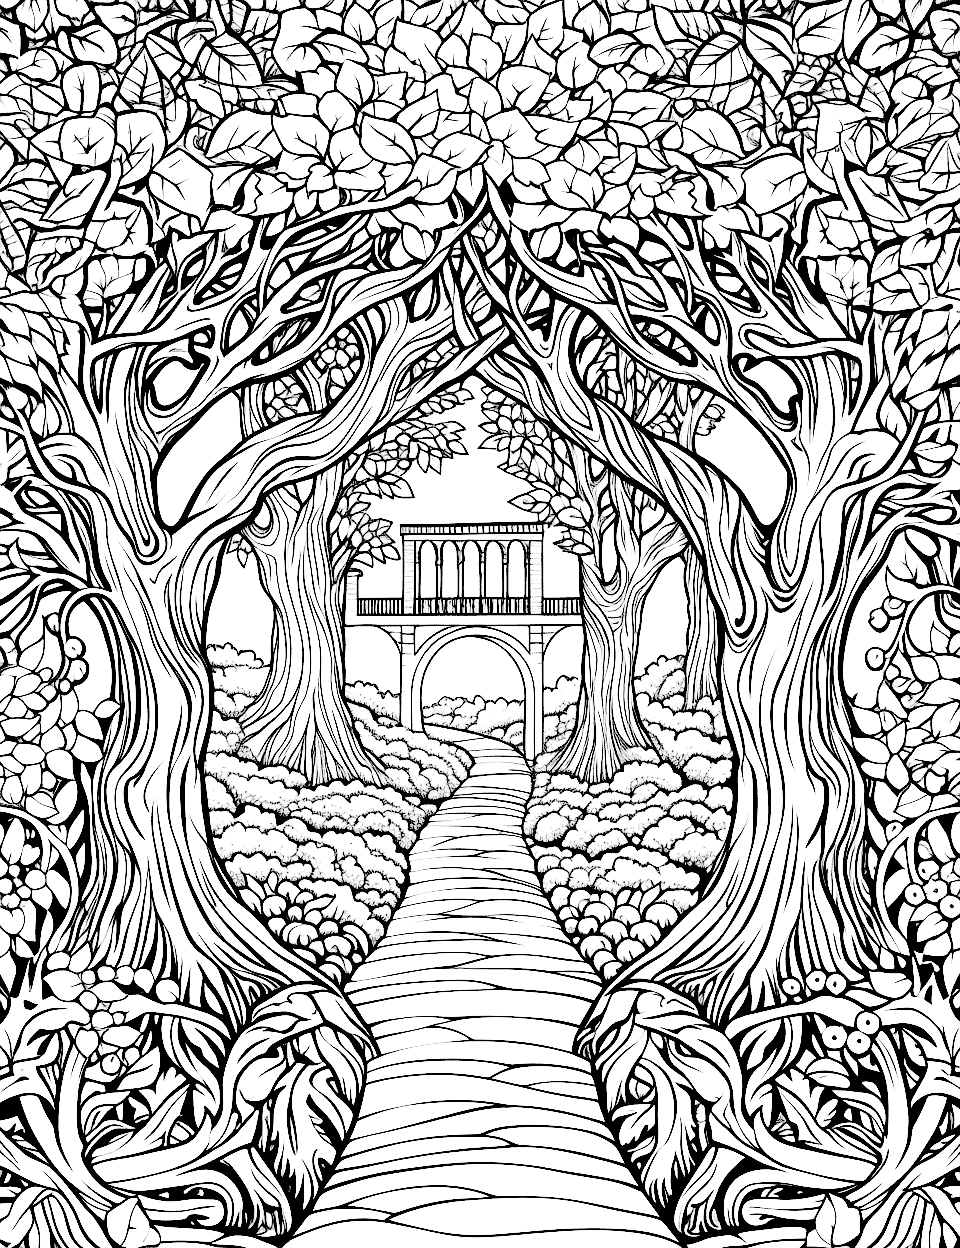 Enchanted Forest Path Adult Coloring Page - A winding path with trees arching overhead.